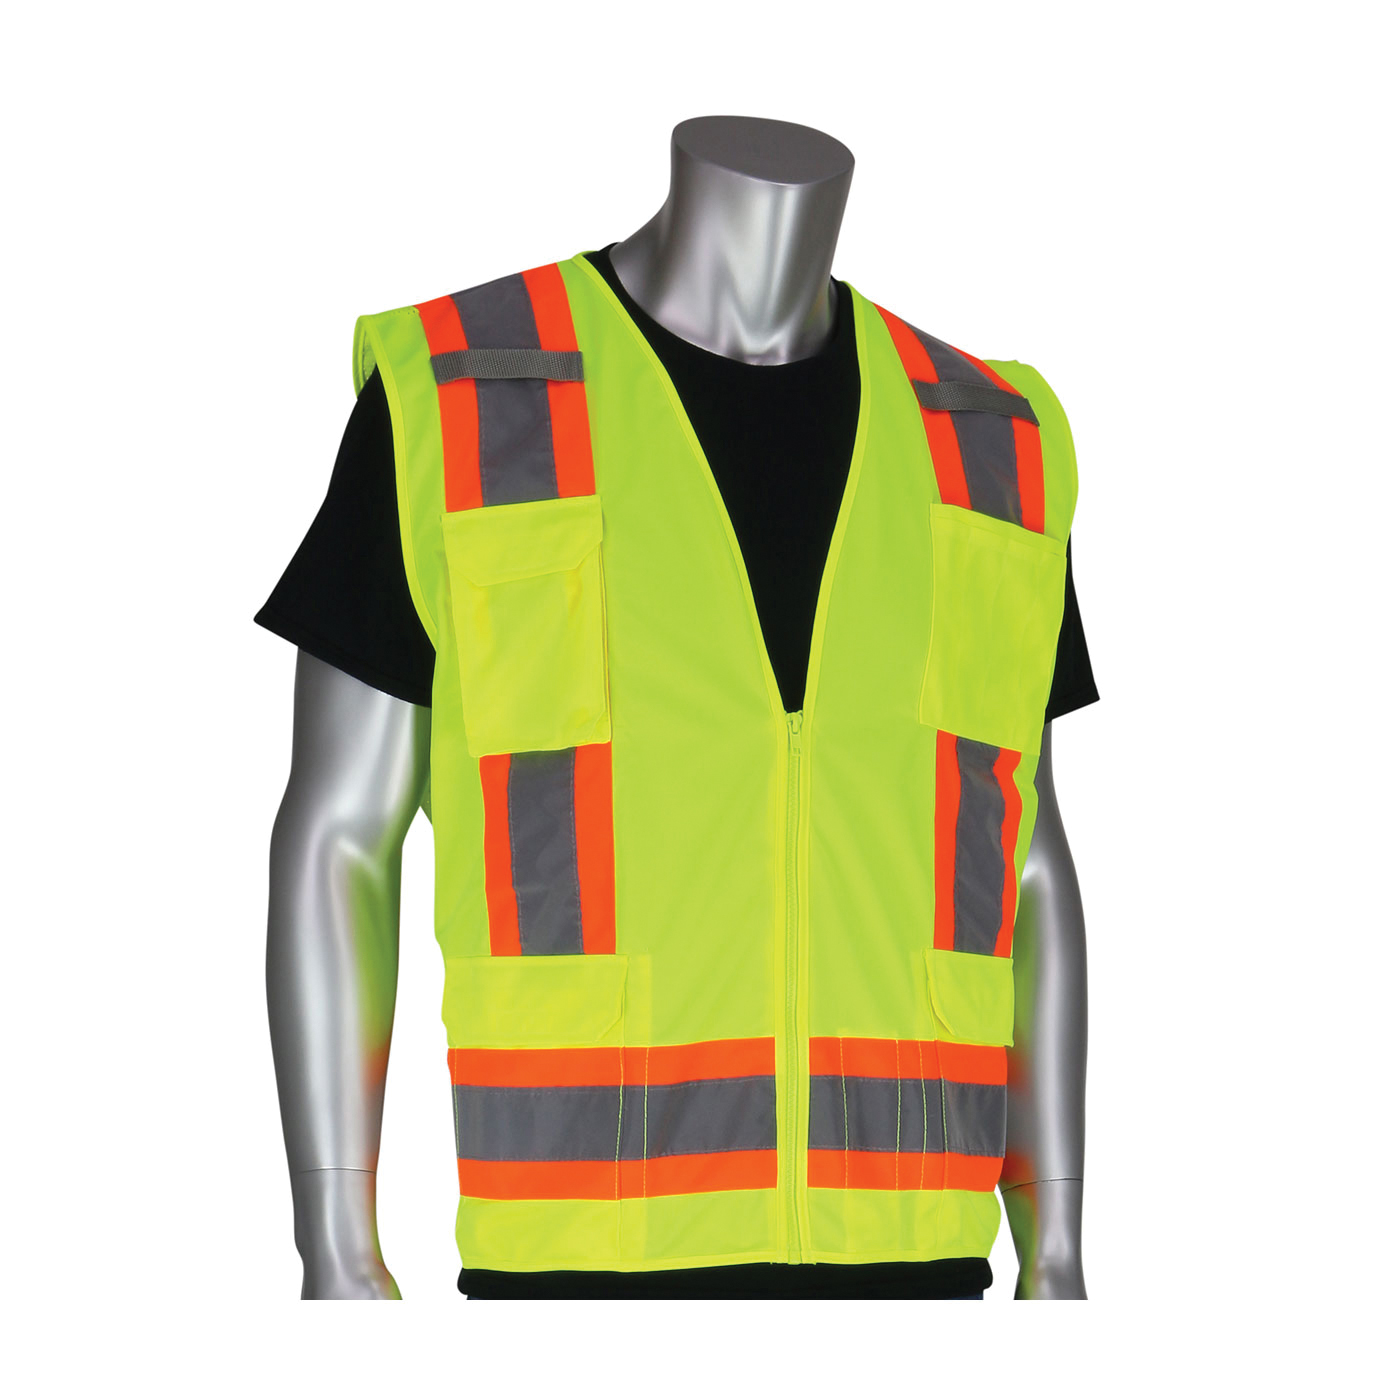 PIP® 302-0500-YEL/6X 2-Tone Surveyor Safety Vest, 6XL, Hi-Viz Lime Yellow, Polyester/Solid Tricot, Zipper Closure, 11 Pockets, ANSI Class: Class 2, Specifications Met: ANSI 107 Type R